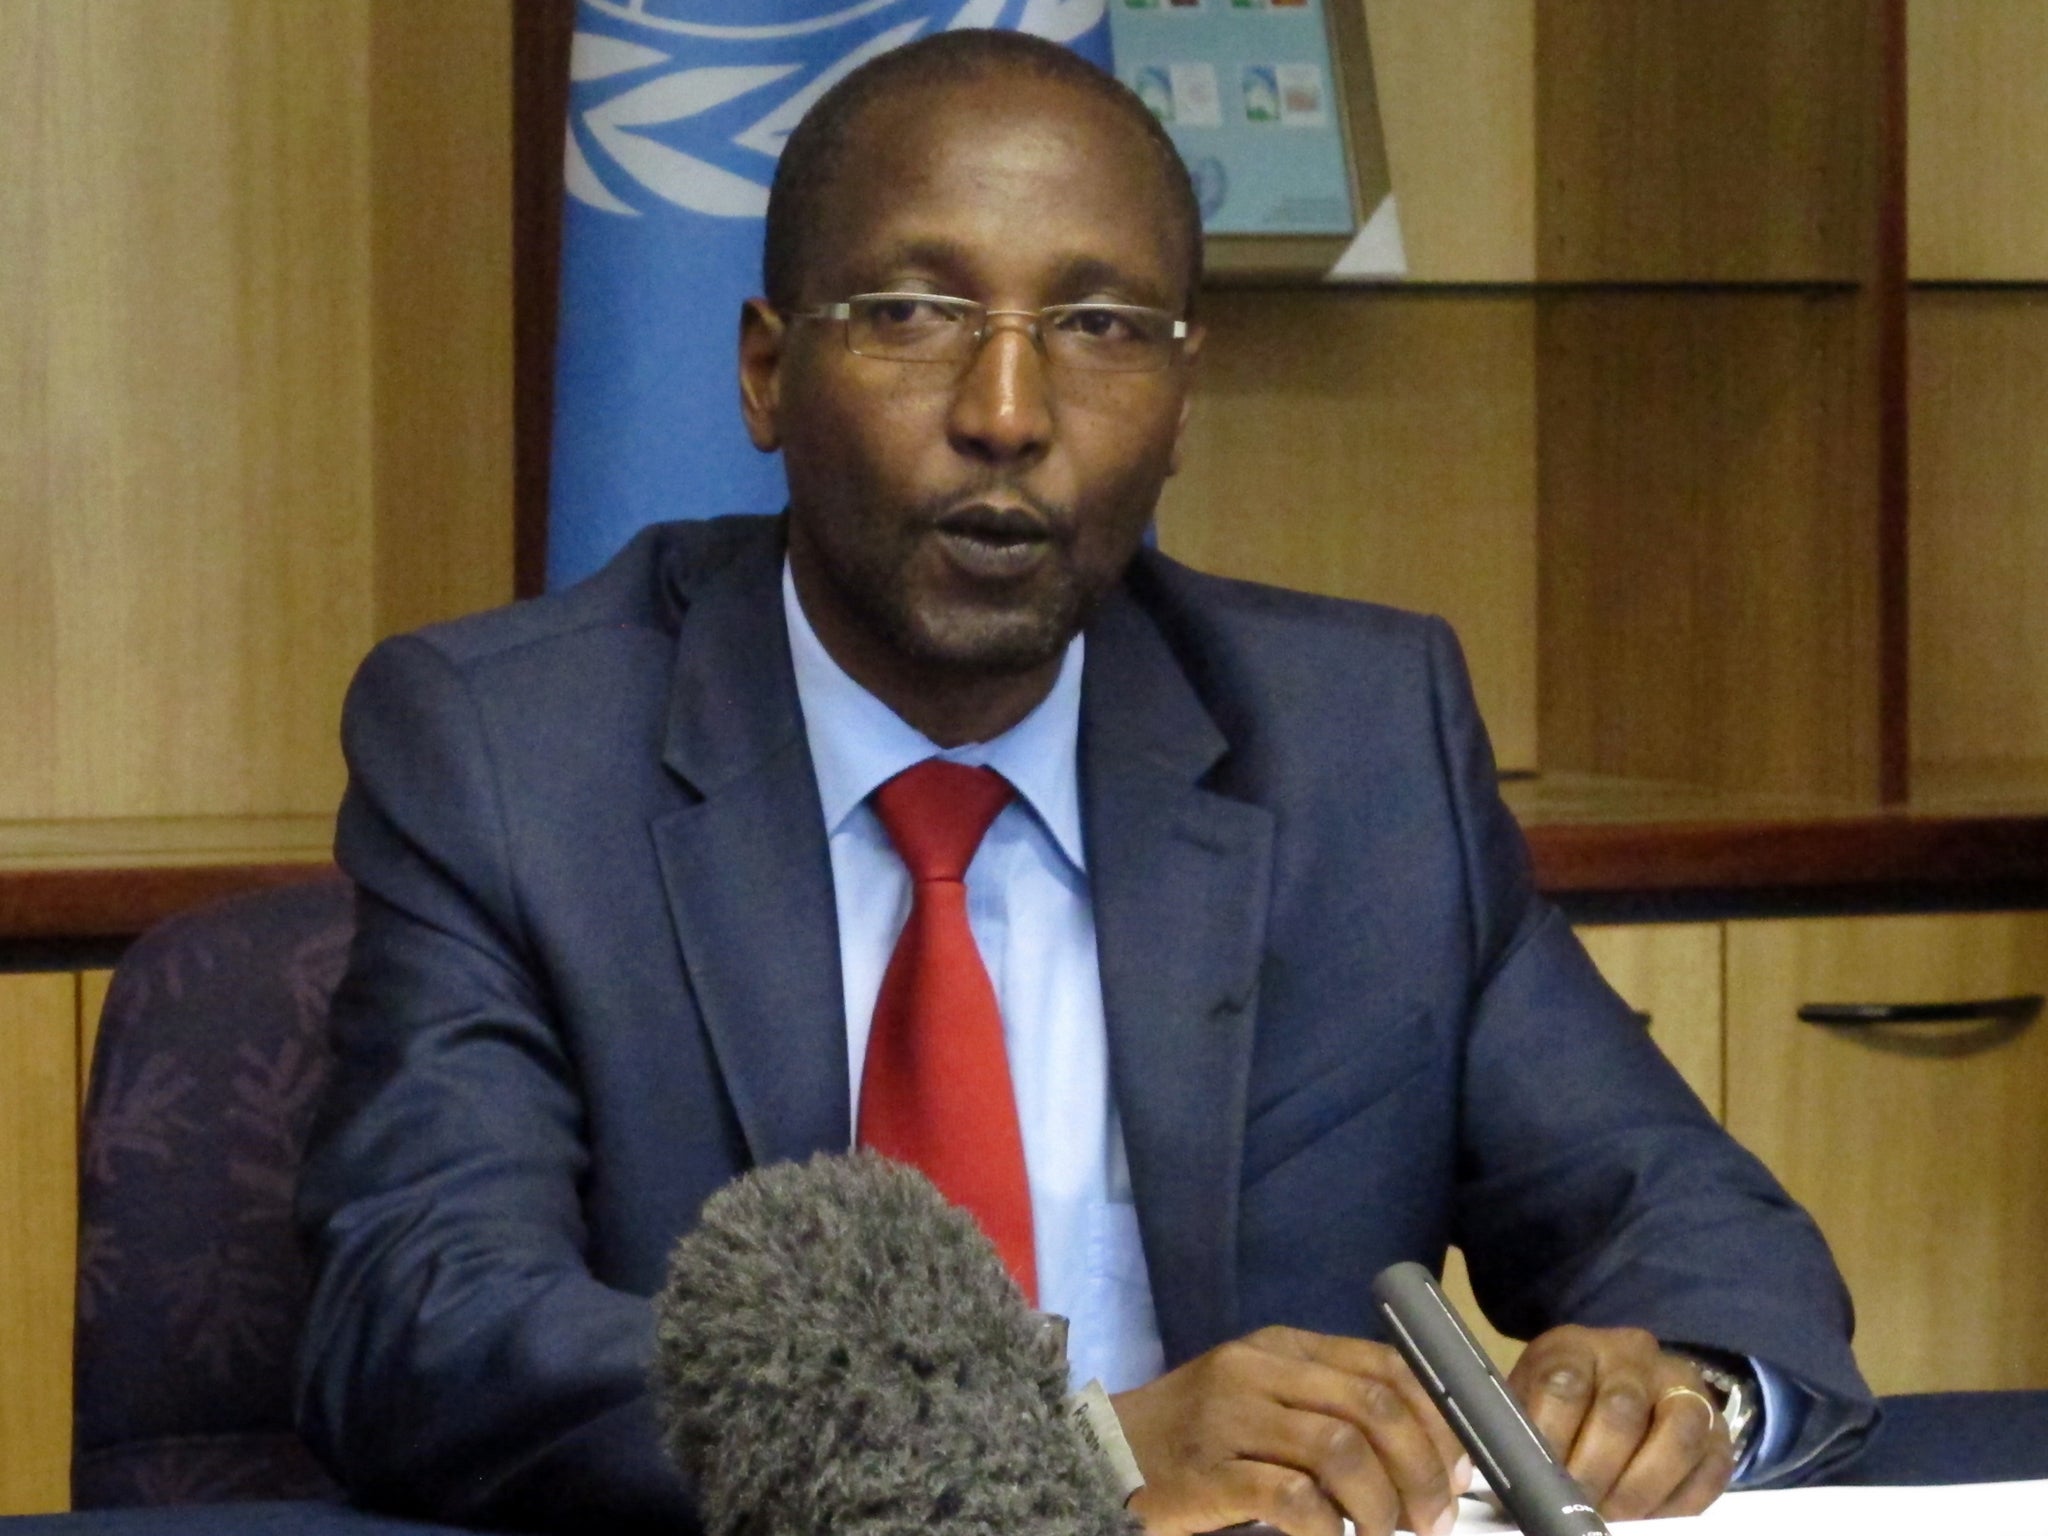 Kenyan rights researcher Mutuma Ruteere o the UN urged Australia not to water down hate-speech prohibitions as bigots and extremists become more vocal